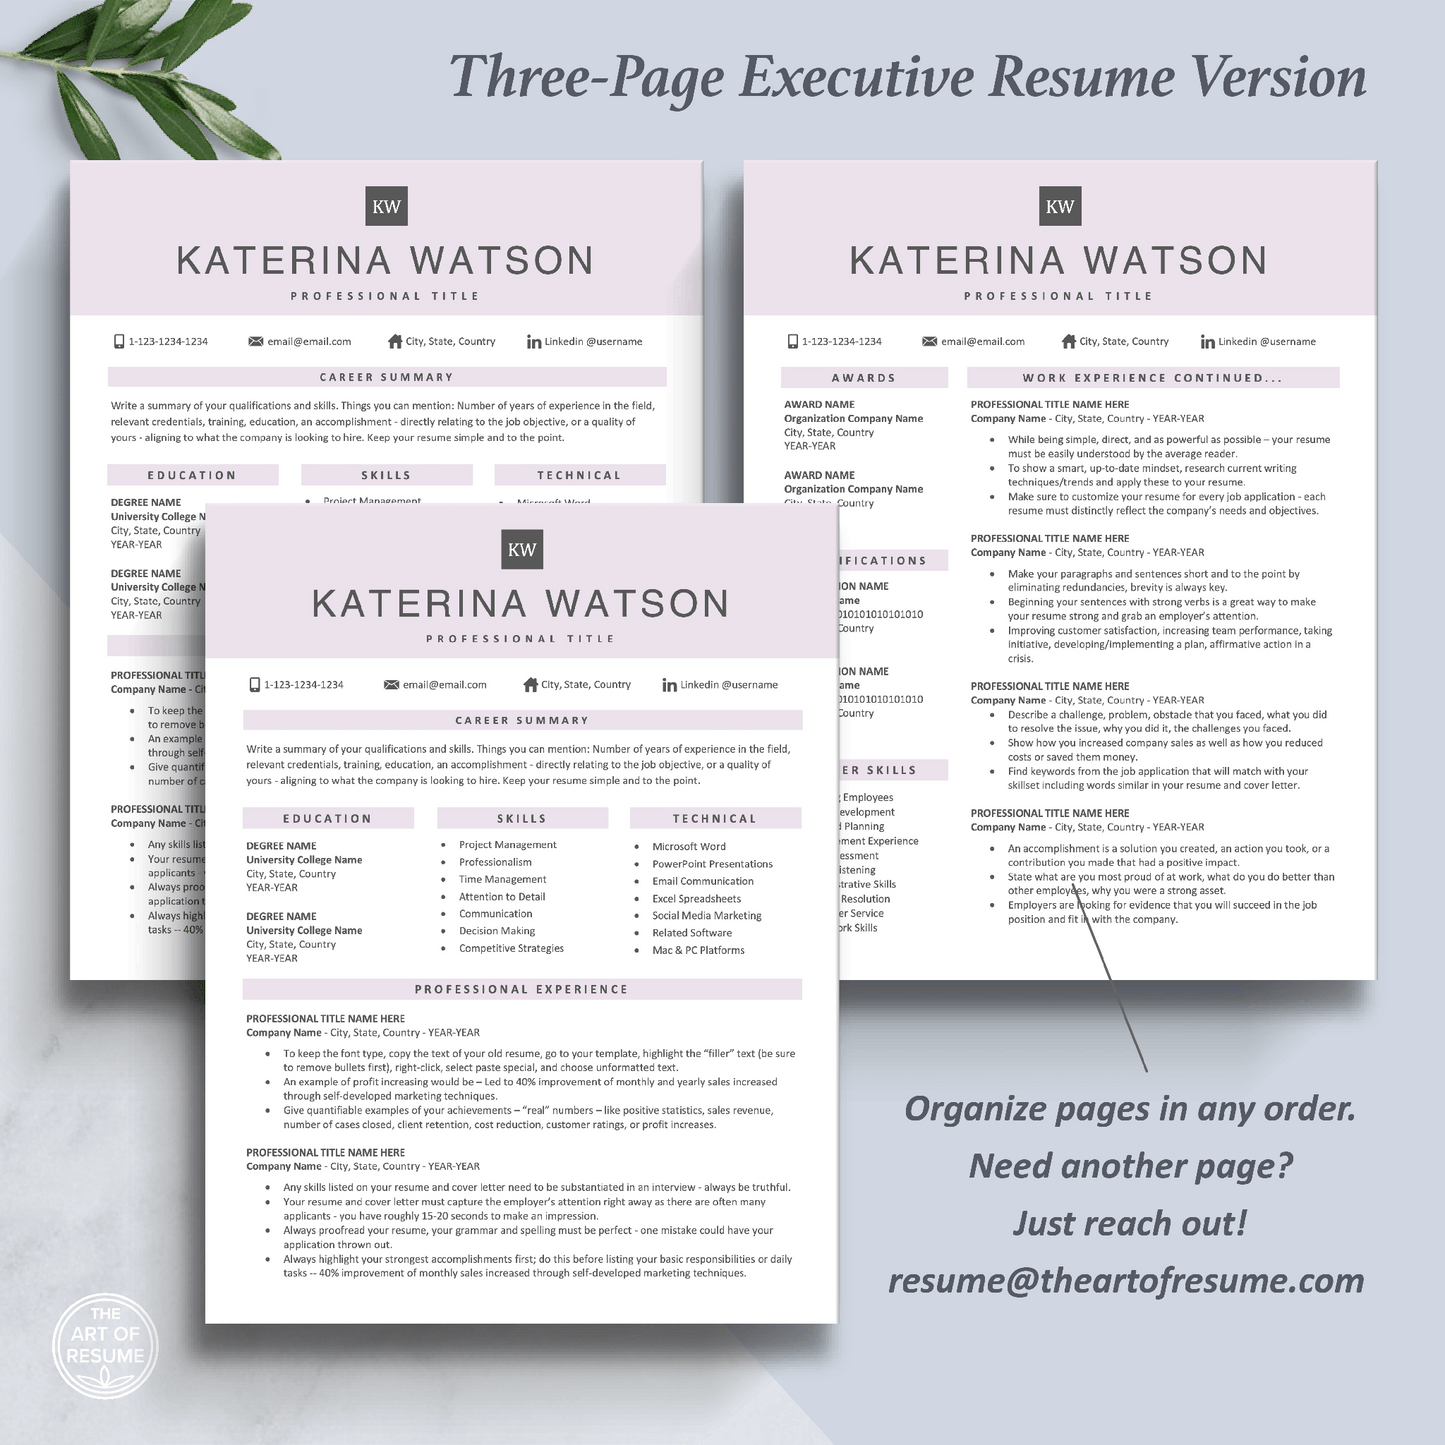 The Art of Resume Templates | Three-Page Professional  Rose Pink Executive CEO C-Suite Level  Resume CV Template Format | Curriculum Vitae